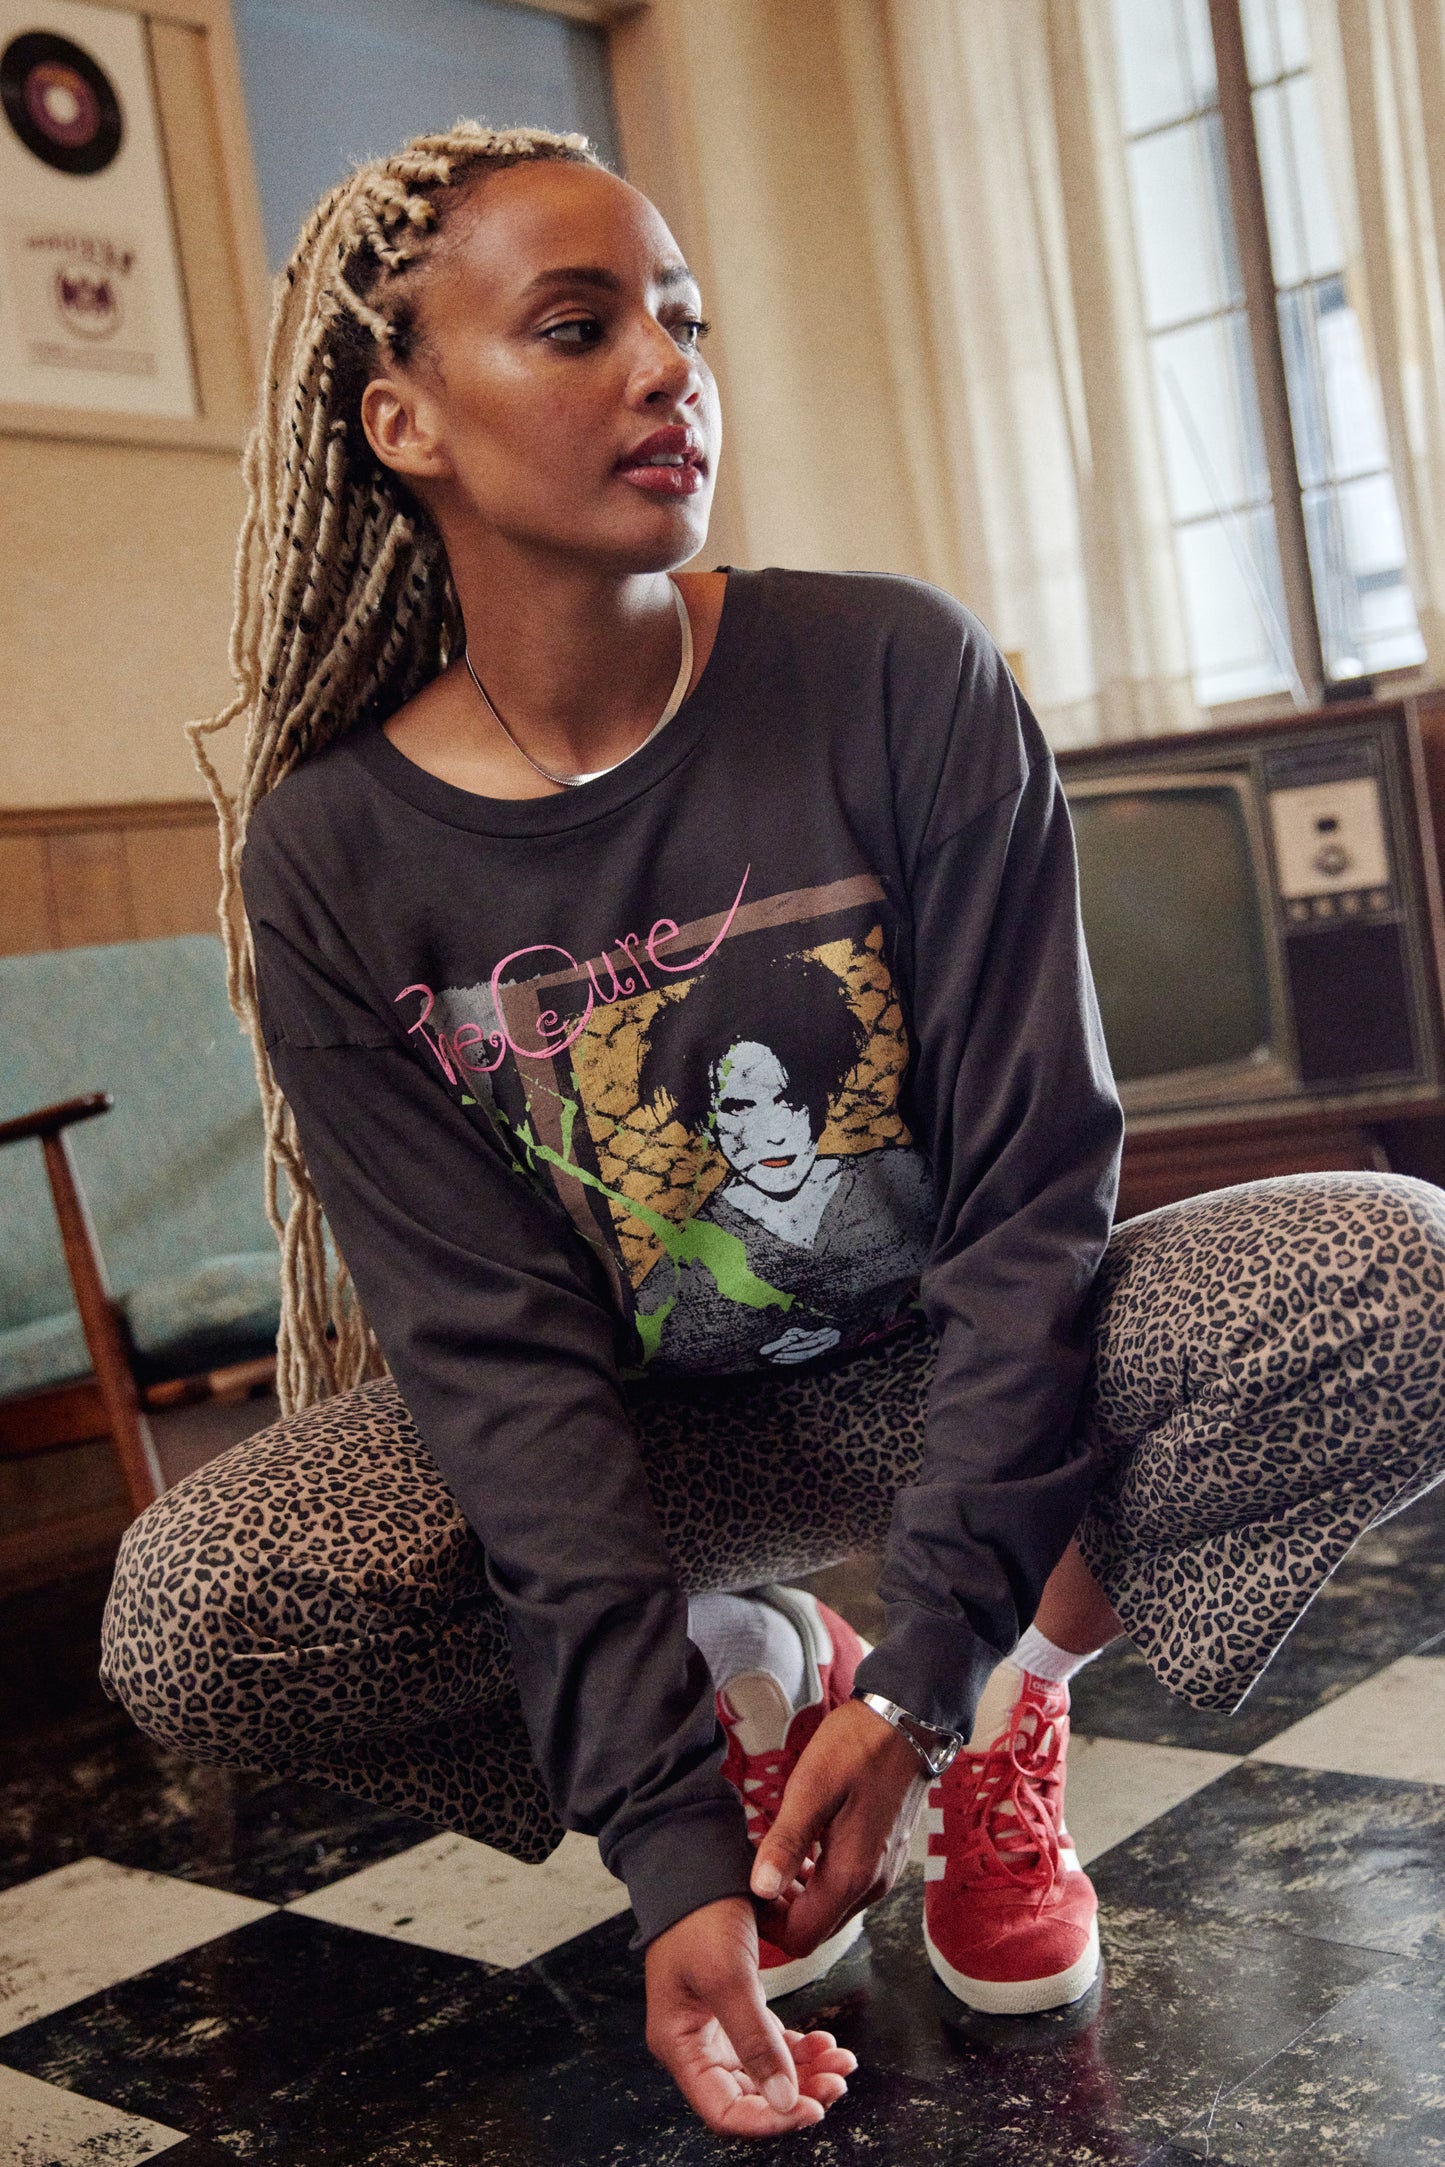 A model featuring a black The Cure long sleeve merch designed with a hand-drawn portrait of Smith and doodles in puff ink and pops of color.